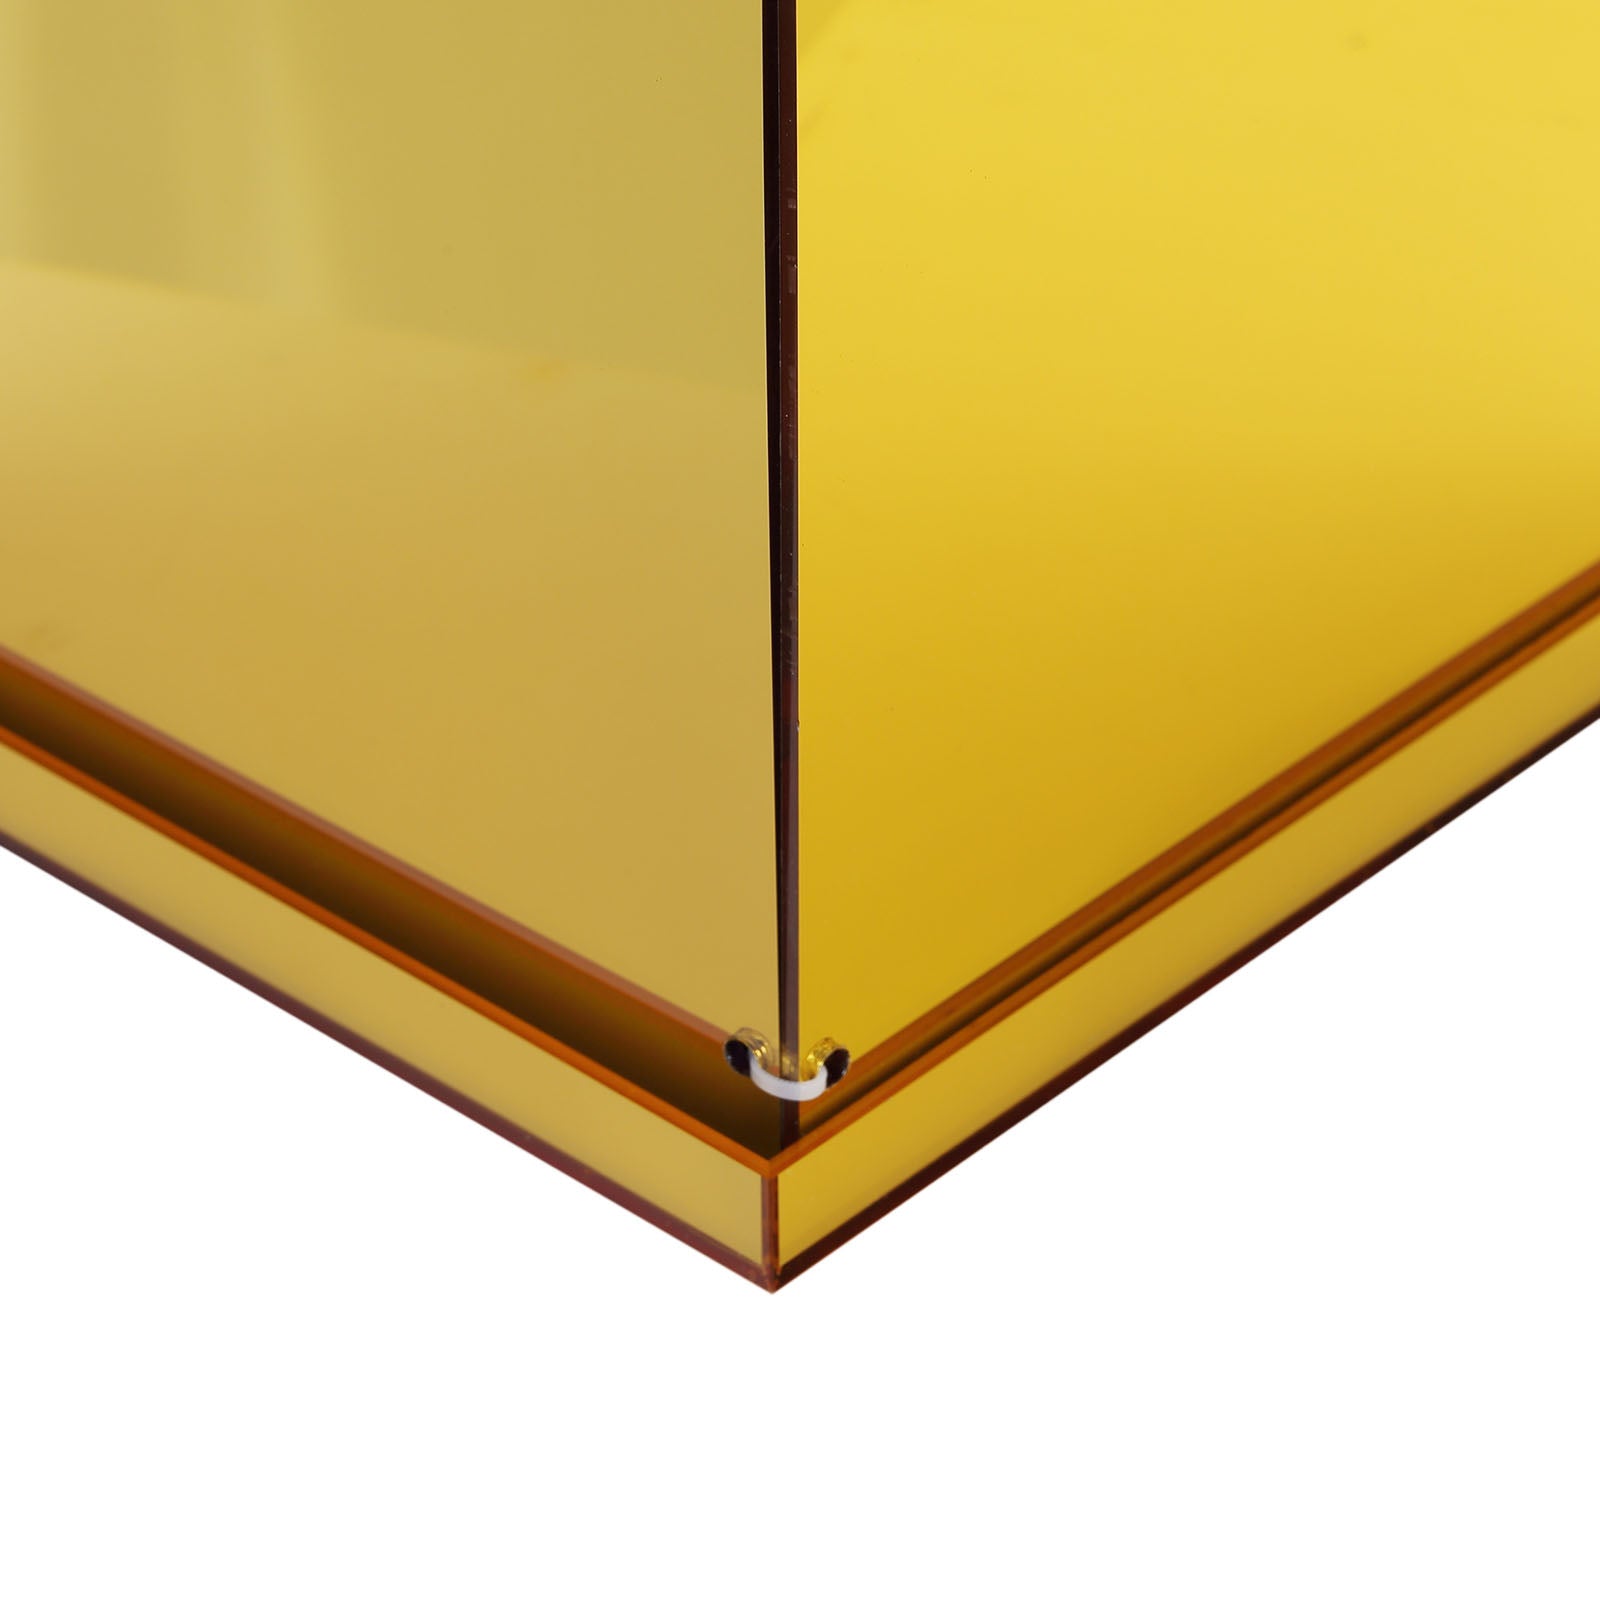 get-your-favorite-players-floor-standing-gold-mirror-finish-acrylic-pedestal-riser-display-box-with-interchangeable-lid-and-base-40-on-sale_12.jpg